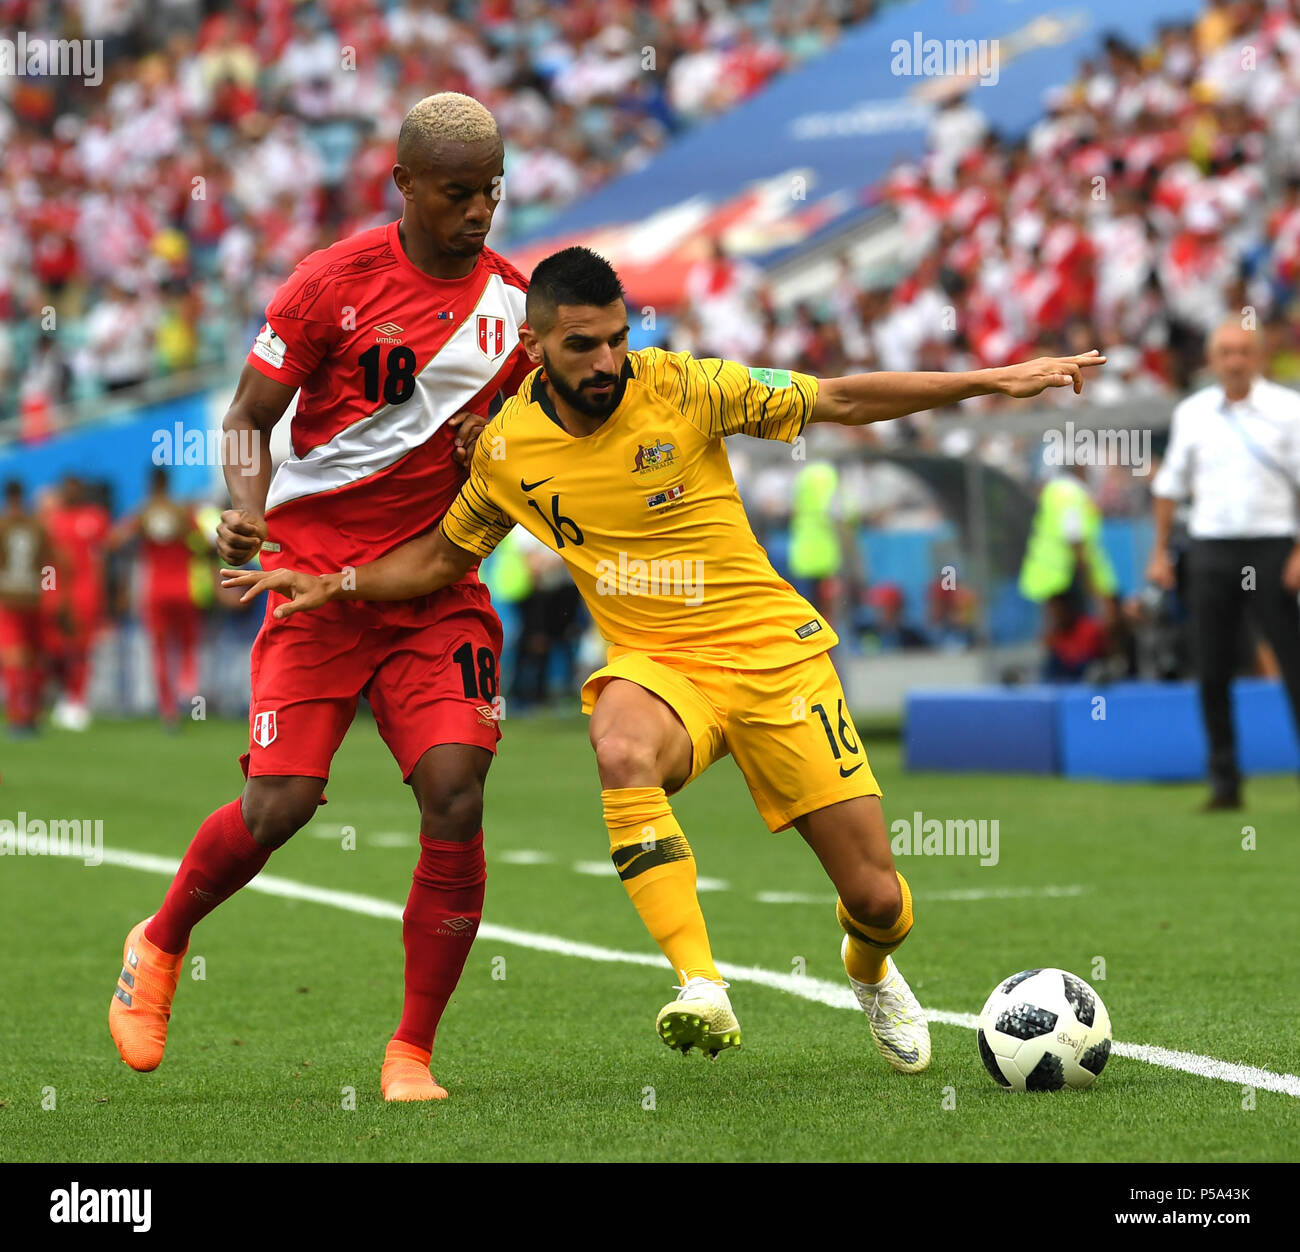 Sochi, Russia. 26th June, 2018. Aziz Behich (R) of Australia vies with Andre Carrillo of Peru during the 2018 FIFA World Cup Group C match between Australia and Peru in Sochi, Russia, June 26, 2018. Credit: Chen Cheng/Xinhua/Alamy Live News Stock Photo